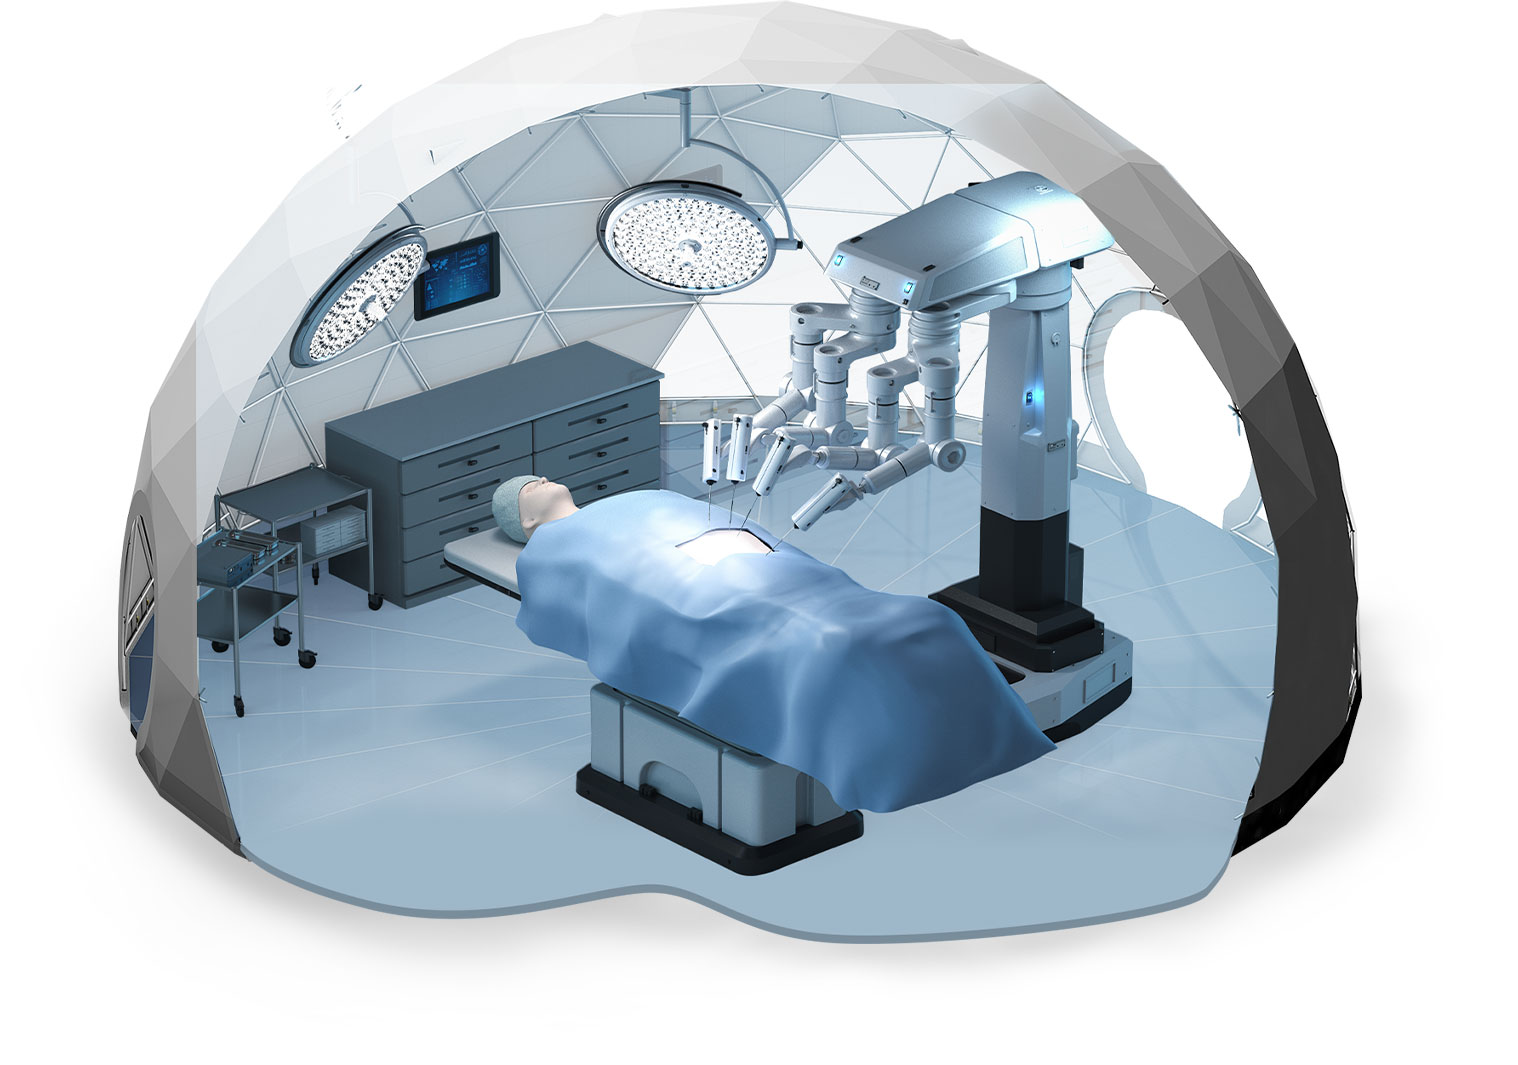 Hospital Anti-Pandemic COVID System - operating room using geodesic dome construction